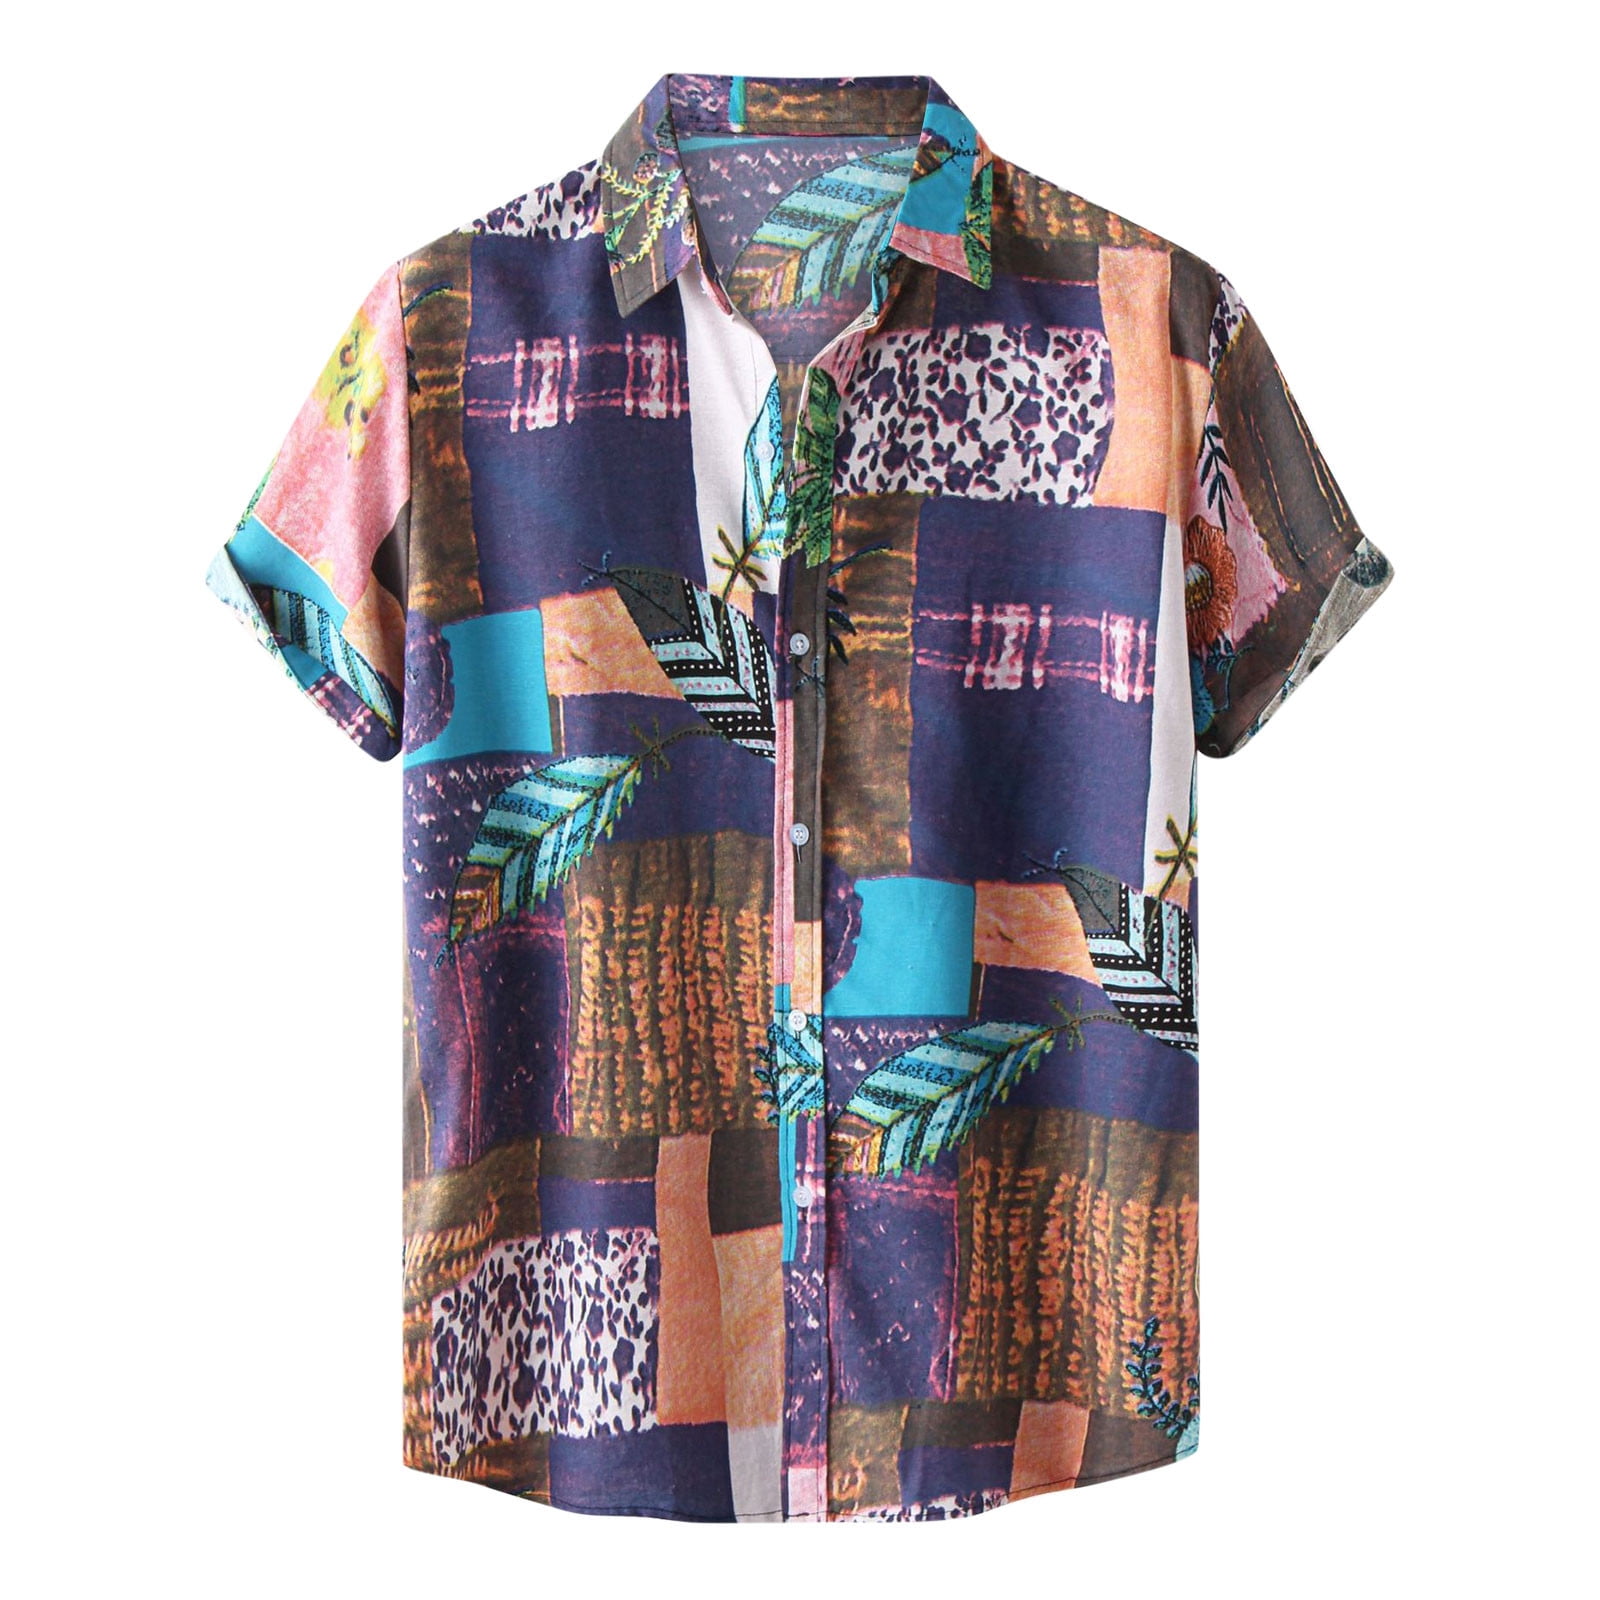 Ernkv Men's Loose Comfy Shirts Clearance Summer Fashion Tropical